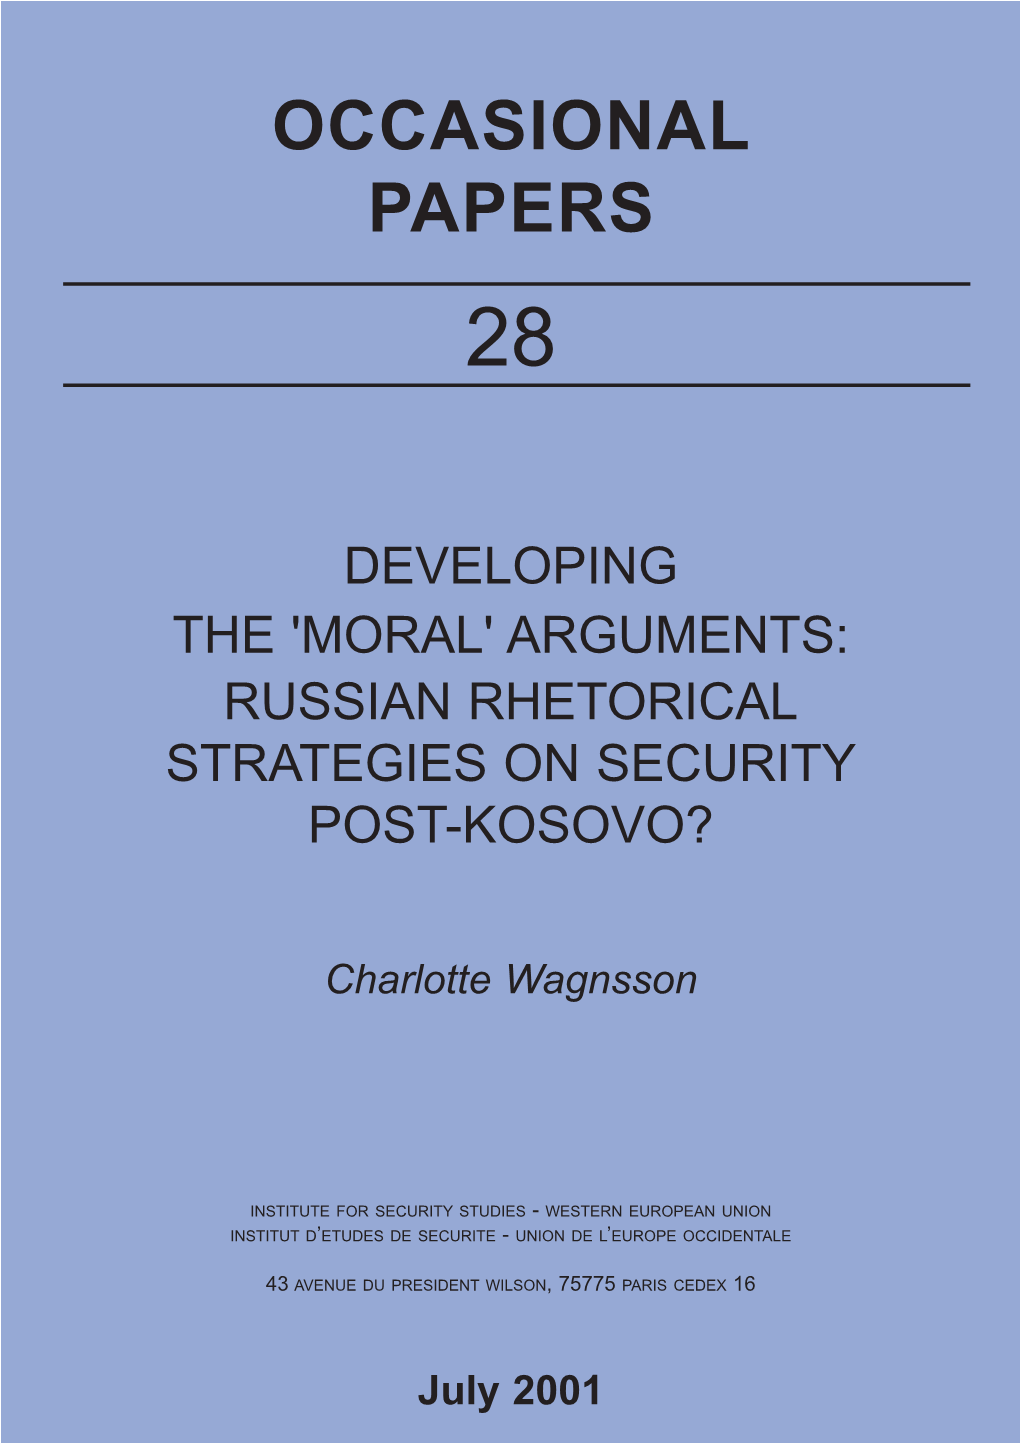 Moral' Arguments: Russian Rhetorical Strategies on Security Post-Kosovo?